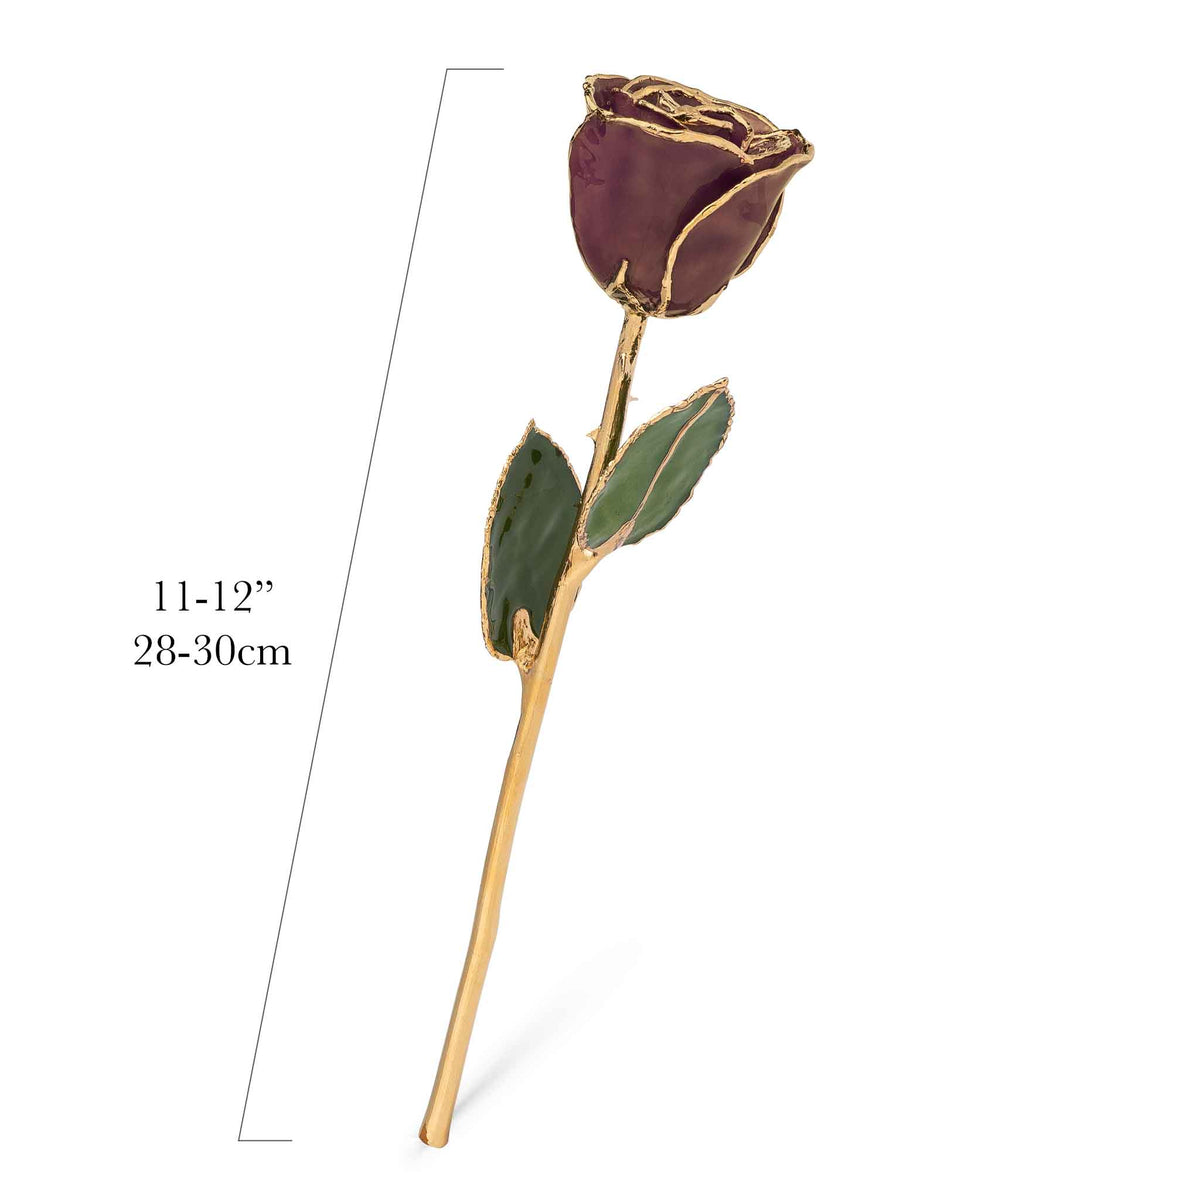 24K Gold Forever Rose - Chocolate